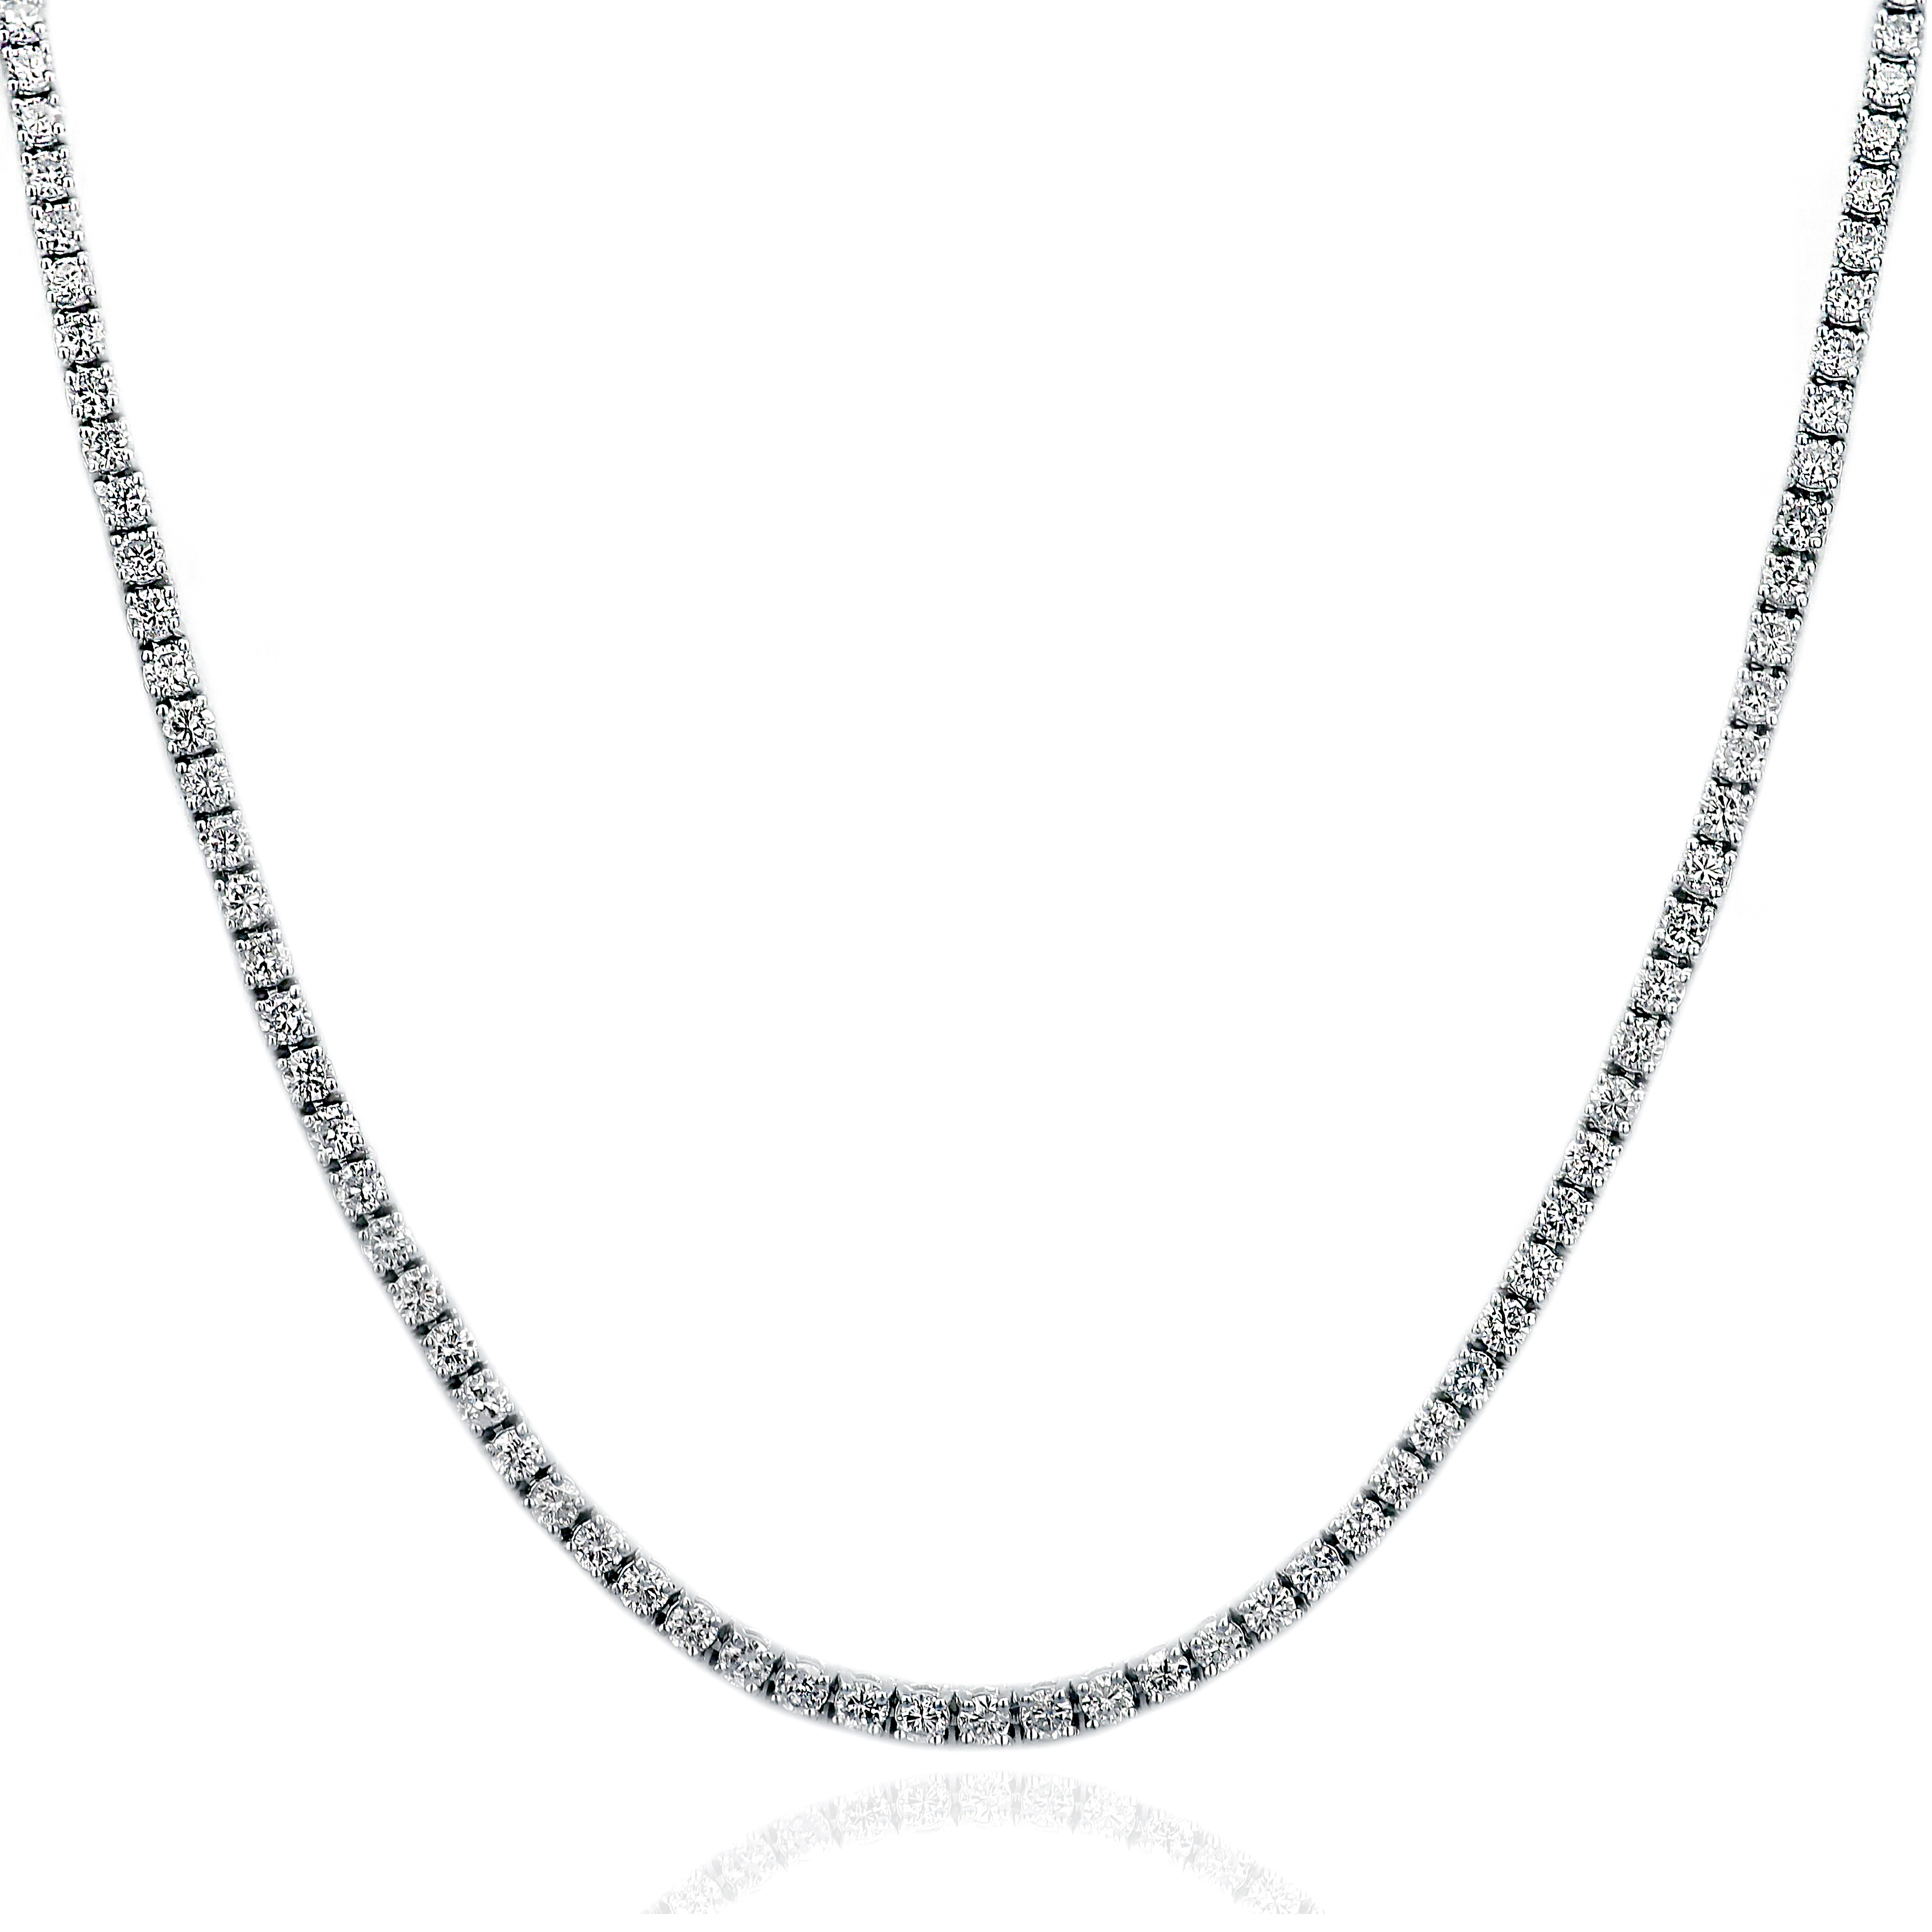 White Gold Tennis Necklace